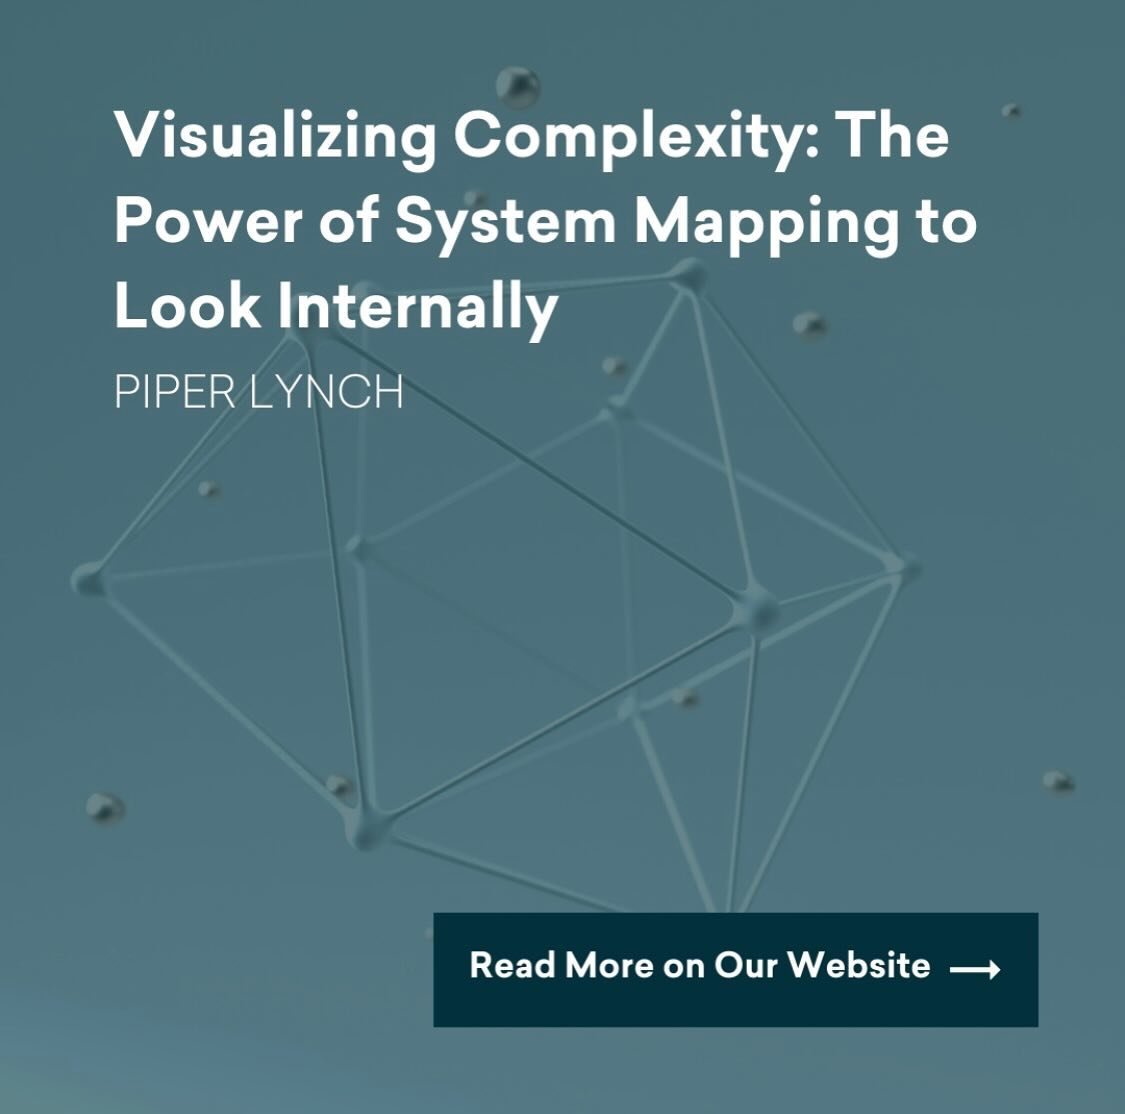 System mapping is an effective tool that can enable organizations to visualize and understand a complex web of relationships and interactions within their community or internal work. Admin. Coordinator, Piper Lynch, breaks it down in her latest blog.